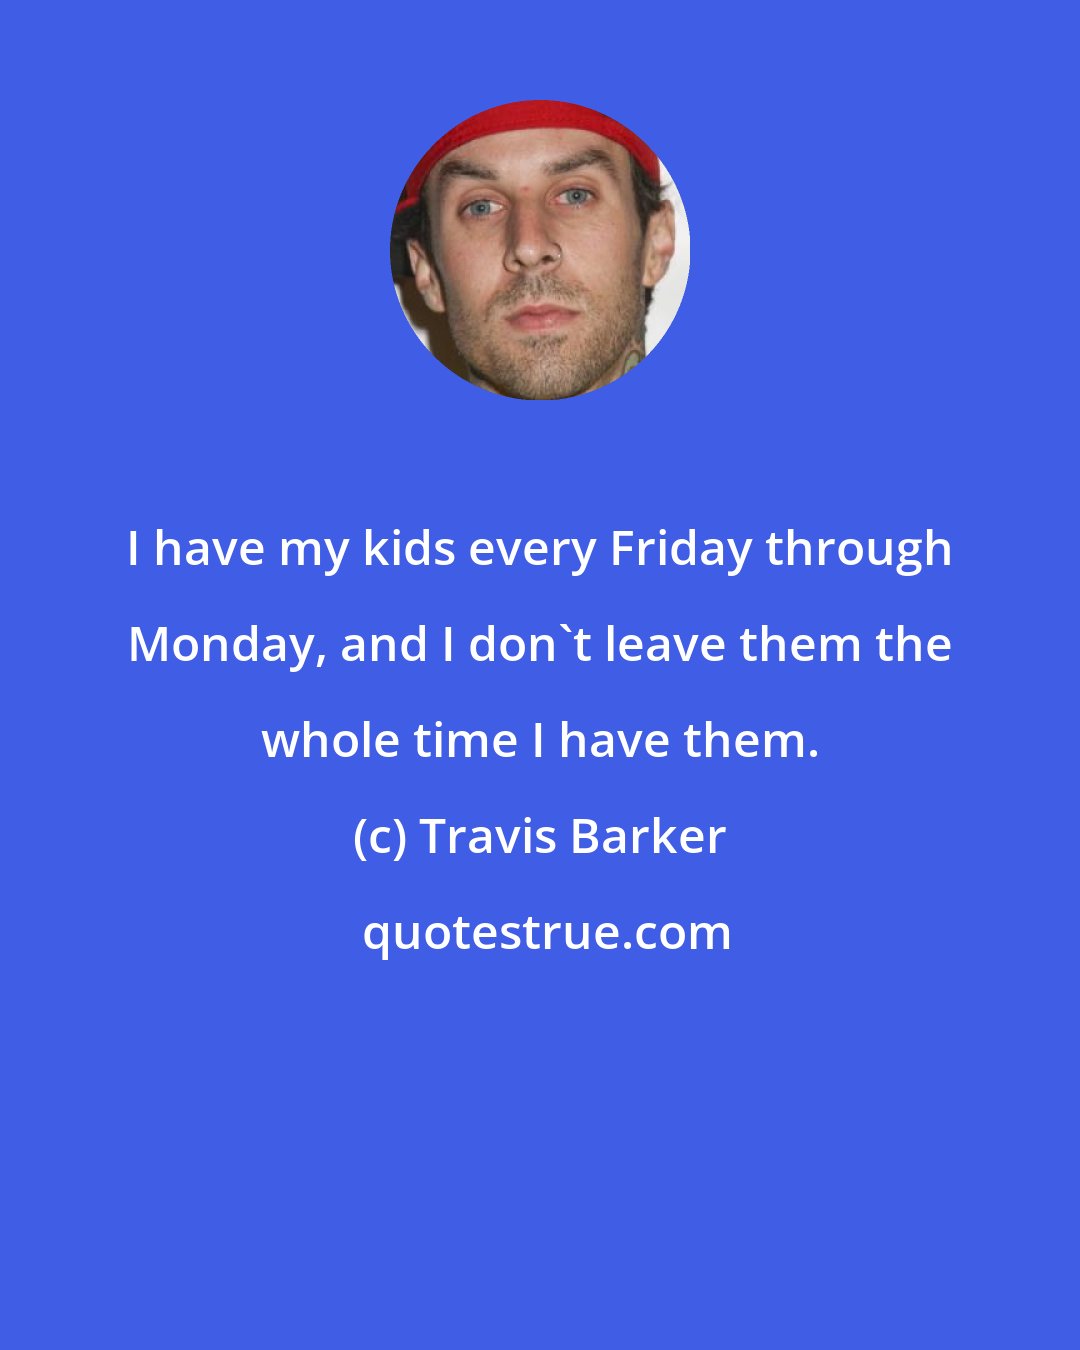 Travis Barker: I have my kids every Friday through Monday, and I don't leave them the whole time I have them.